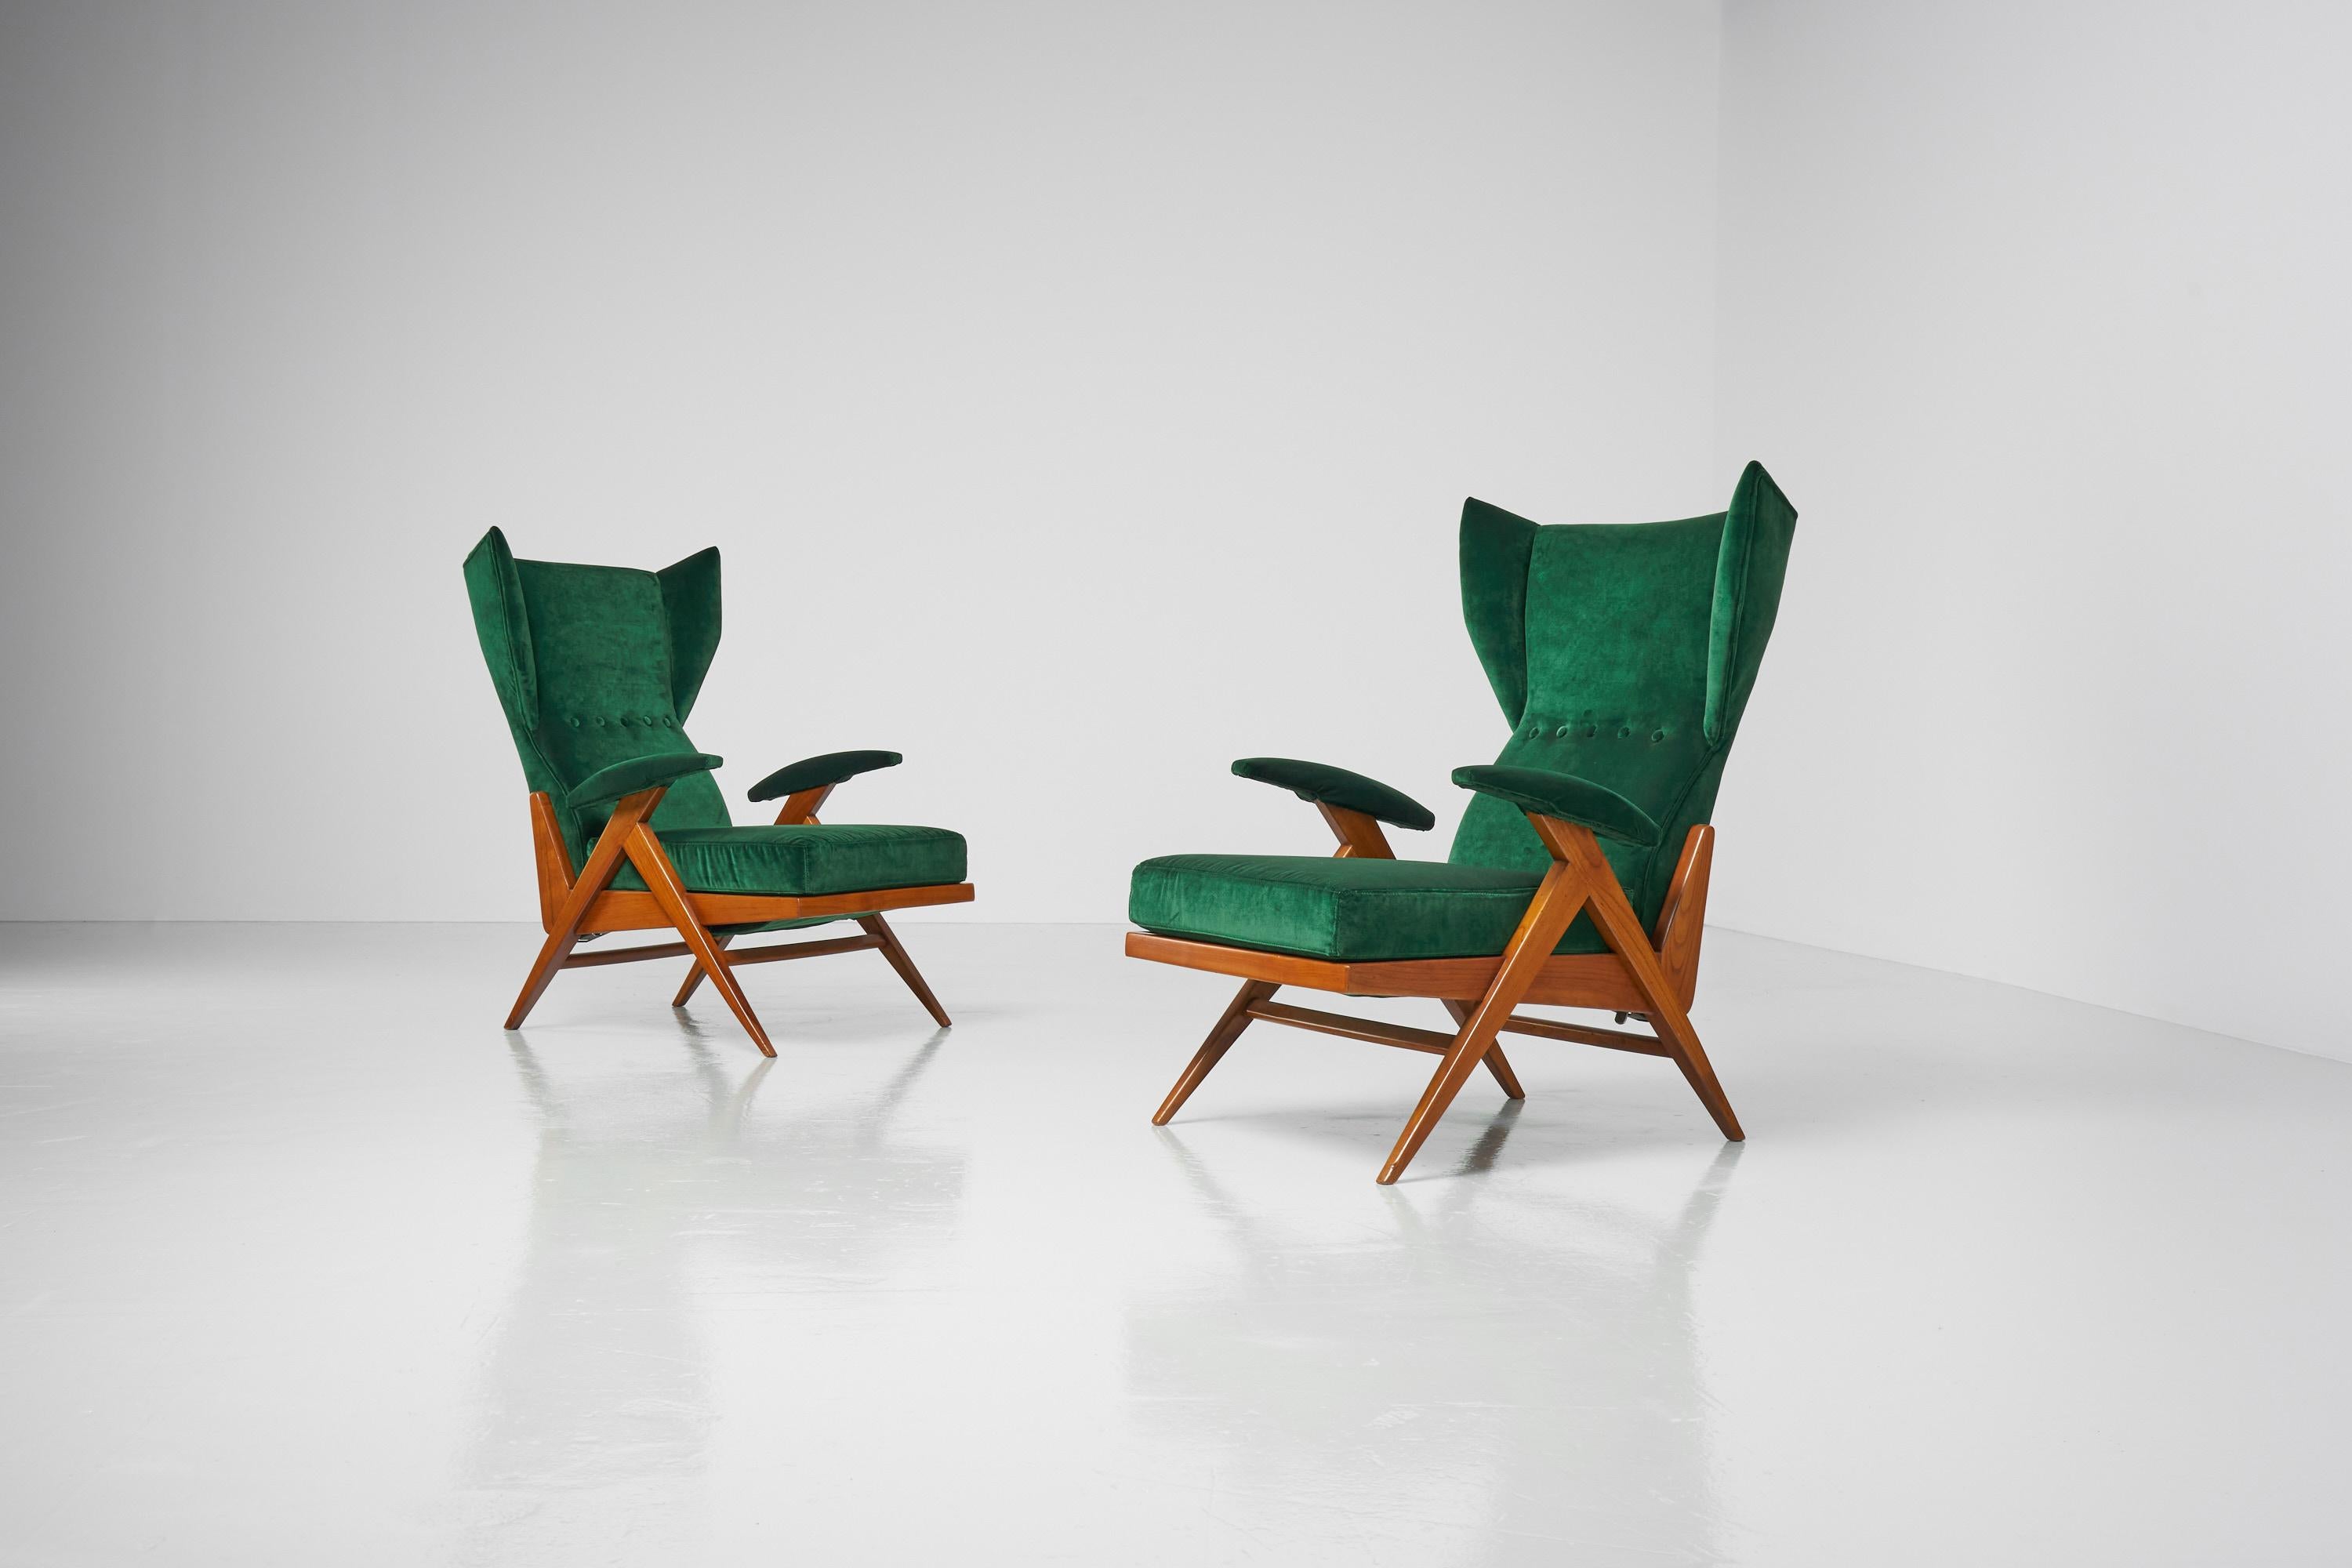 Stunning shaped pair of 'Camea' adjustable lounge chairs designed by Renzo Franchi and manufactured by Camea, Italy 1955. These dynamic shaped chairs have a solid cherry wooden structure, and they are recently reupholstered in a green Gucci velvet